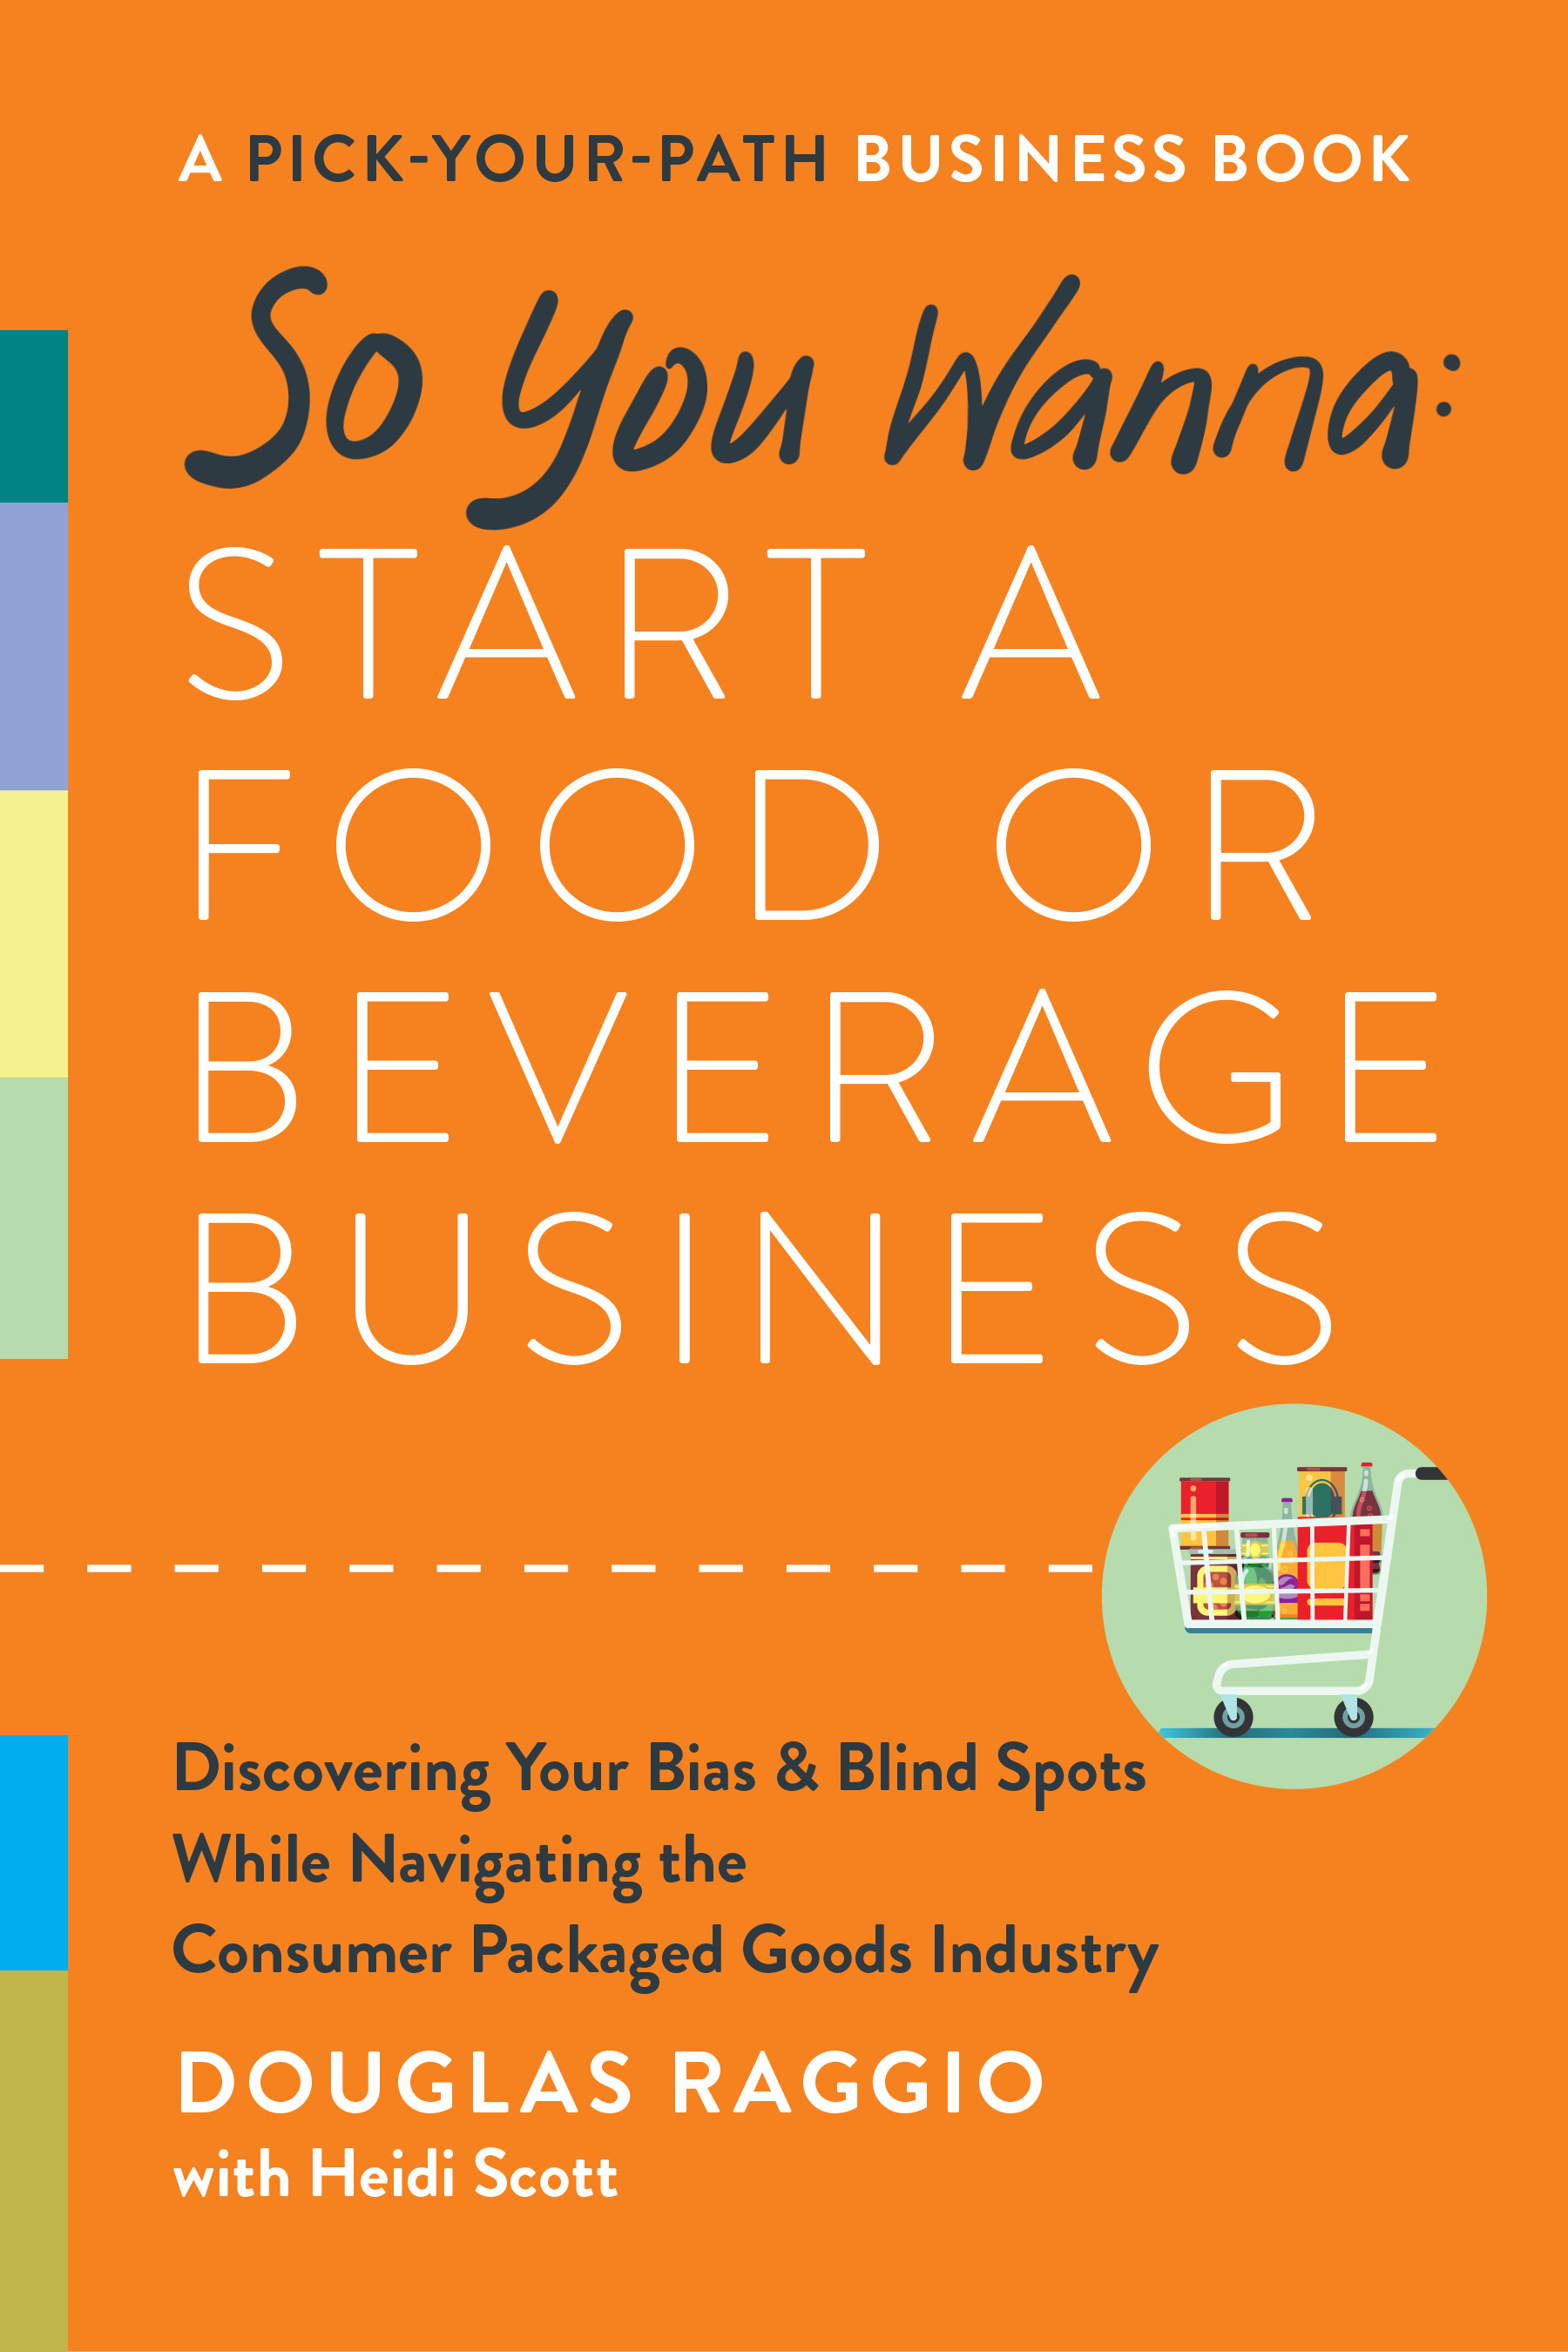 So You Wanna: Start a Food or Beverage Business : A Pick-Your-Path Business Book | Business & Management